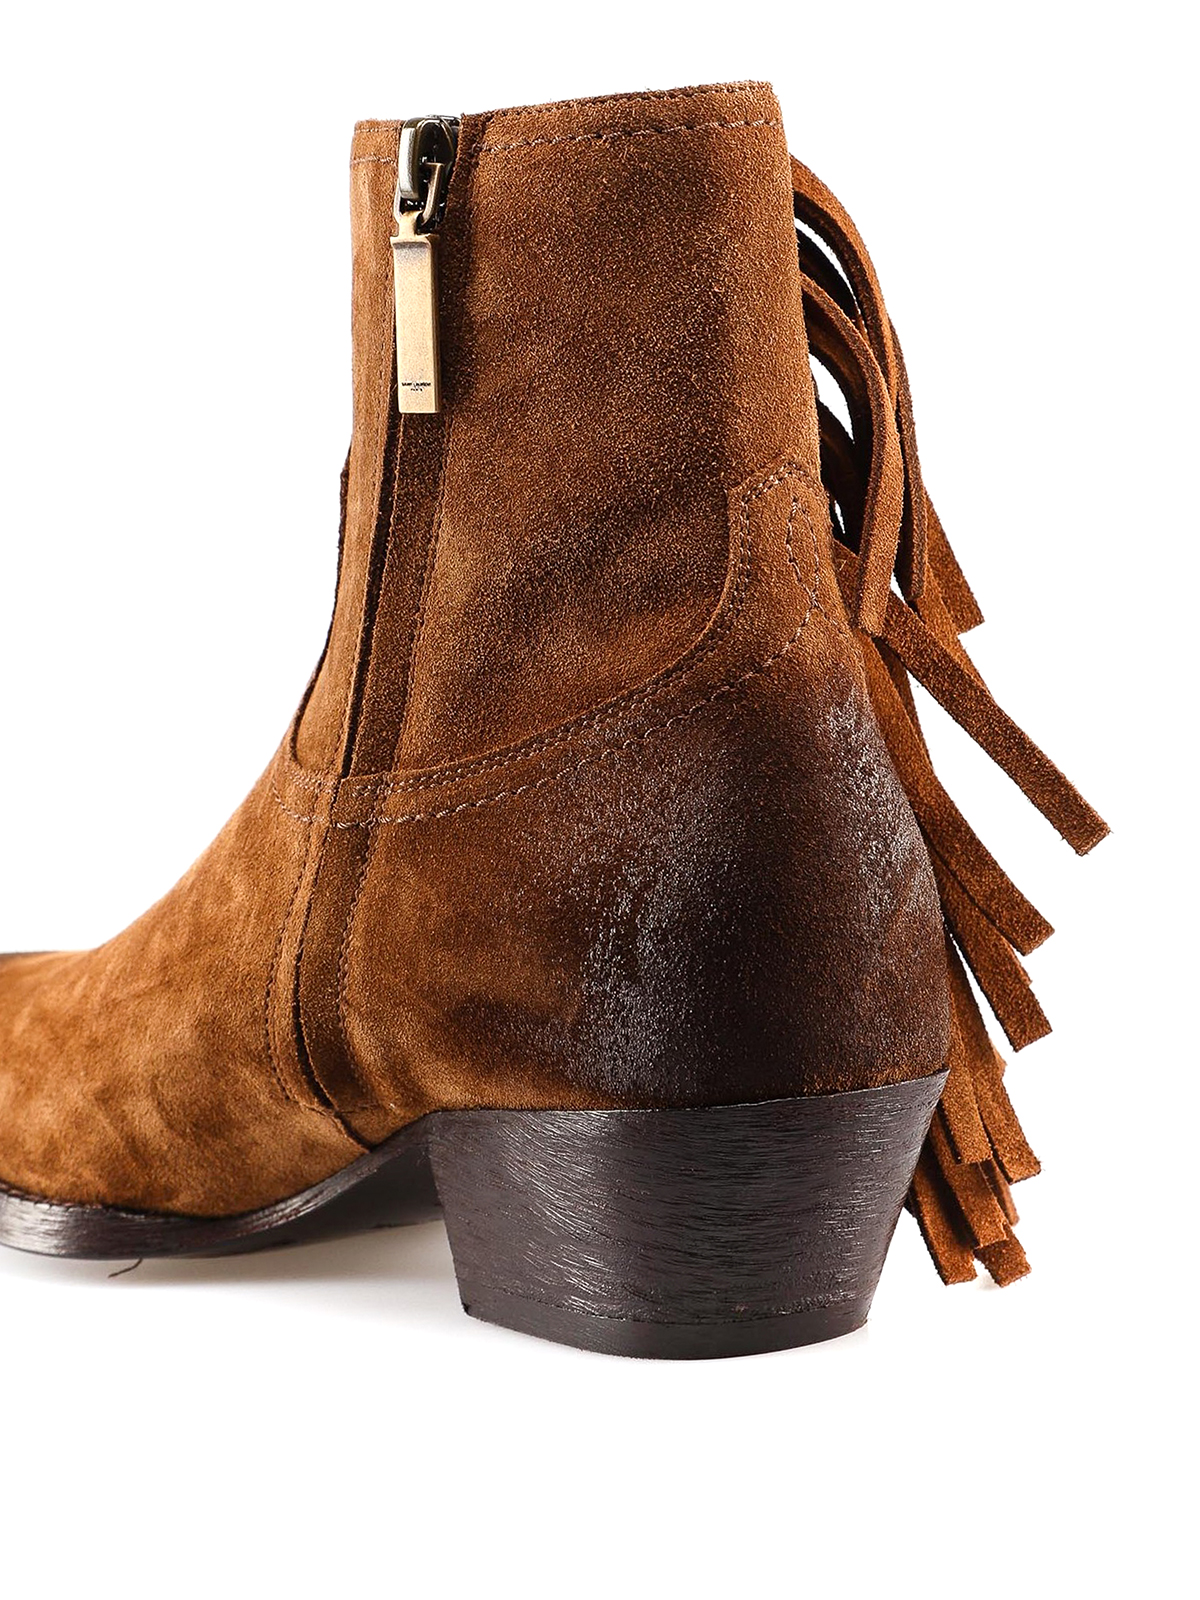 Lukas fringed suede ankle boots 